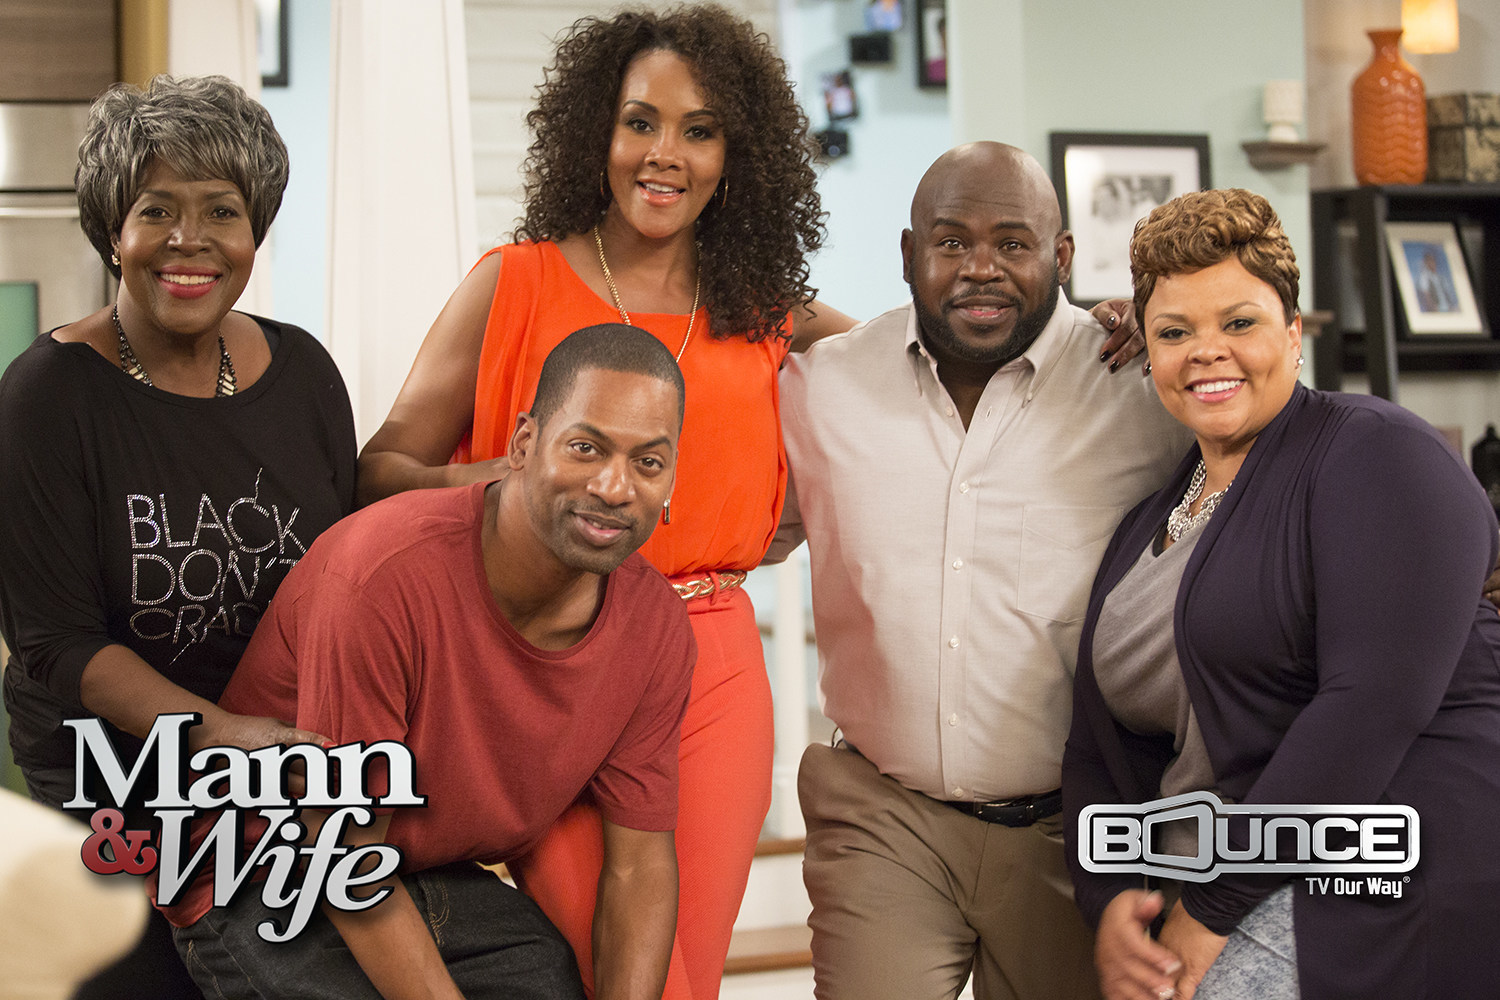 Dallasites David and Tamela Mann launch new show on Bounce TV